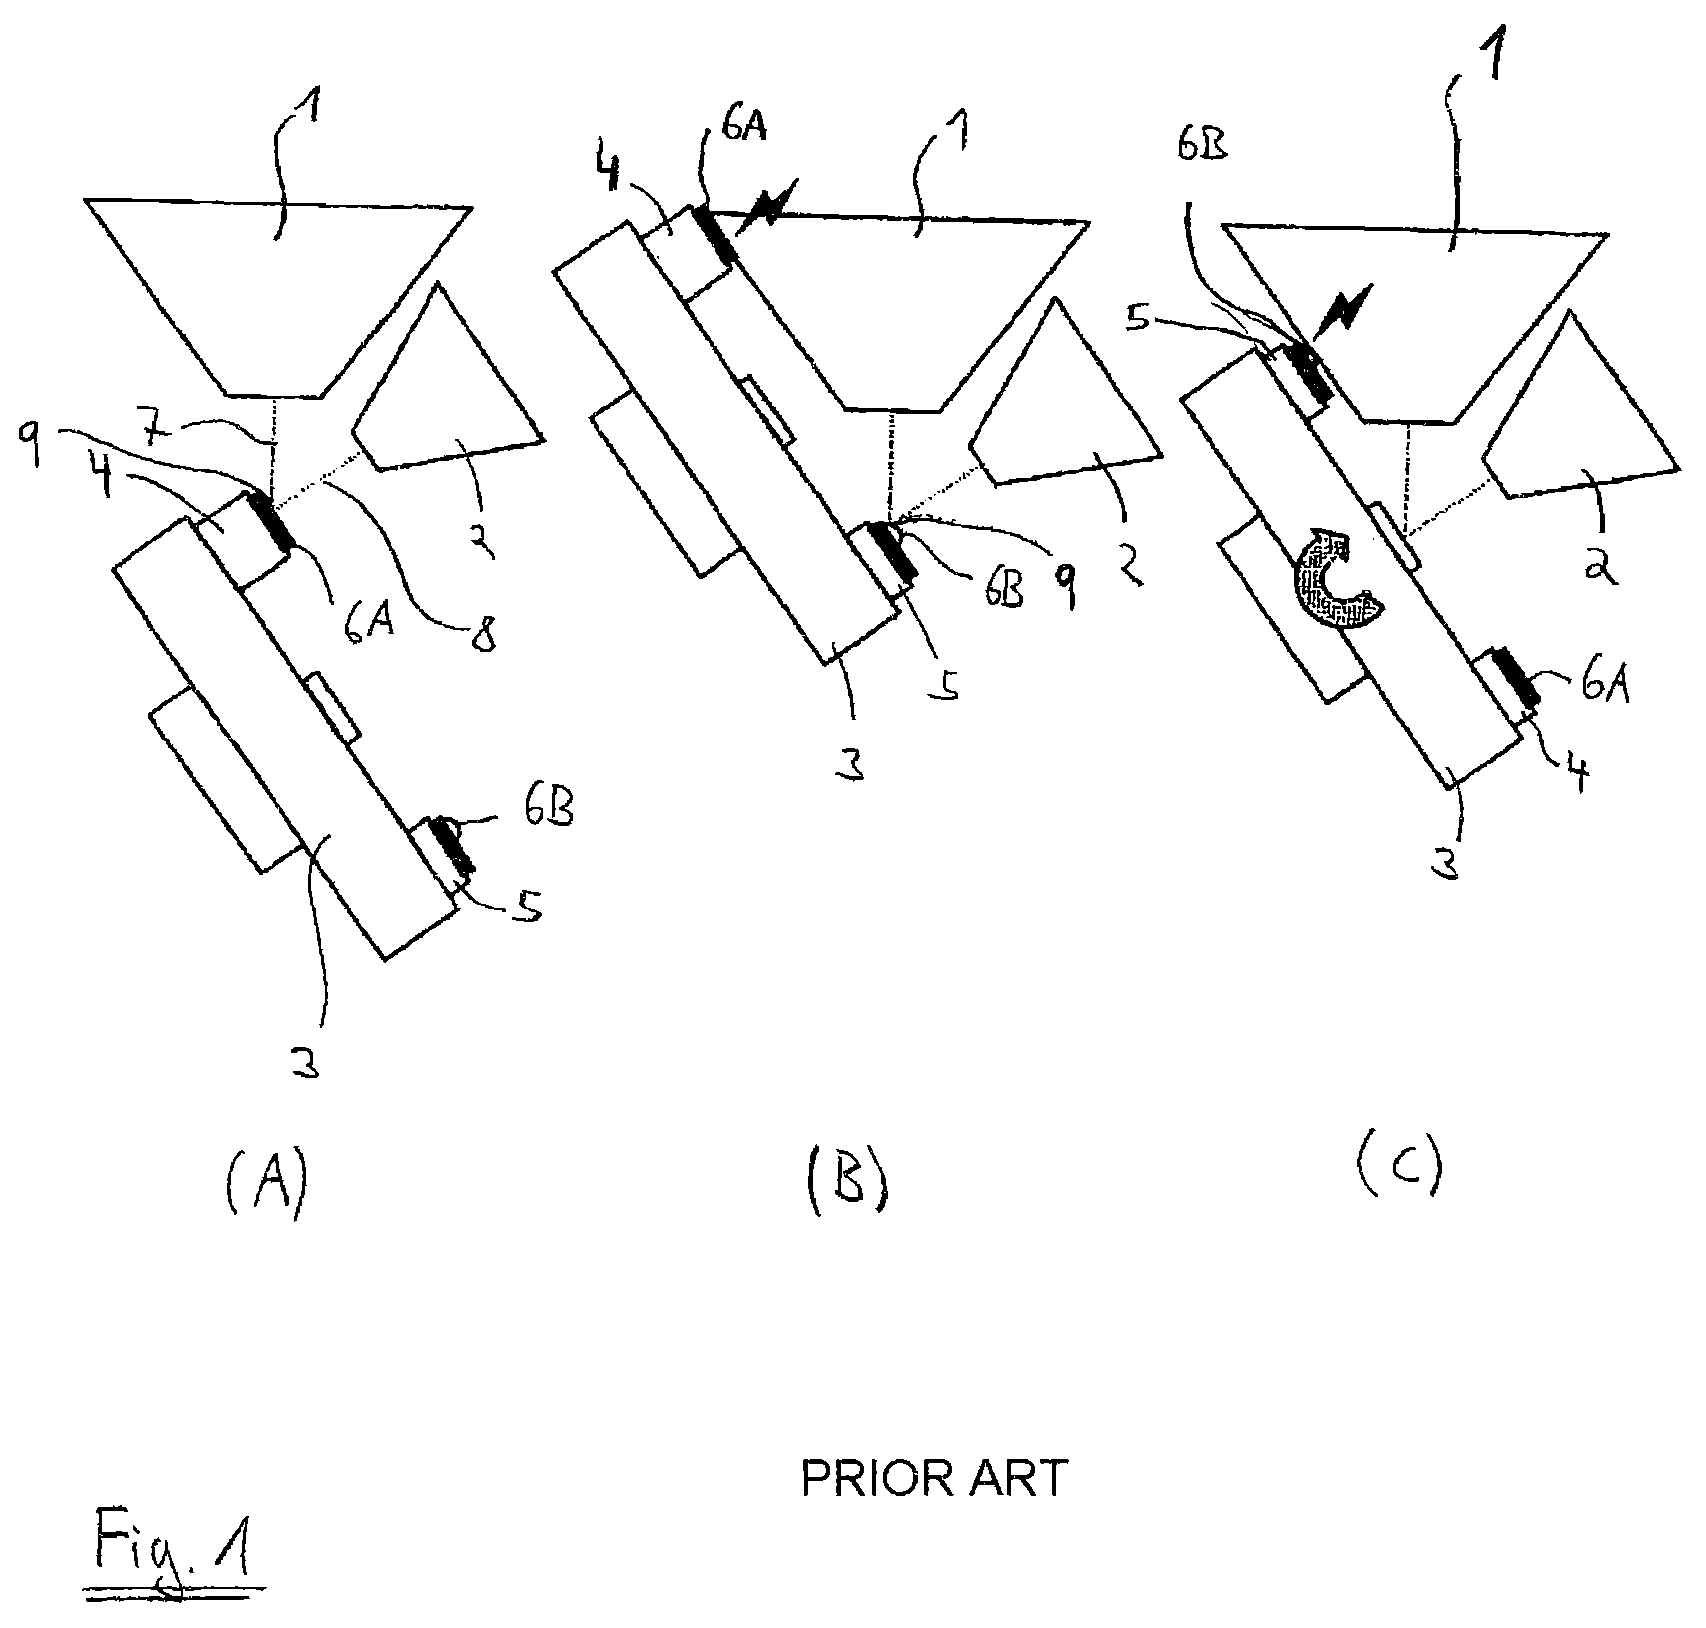 Particle beam device having a sample holder